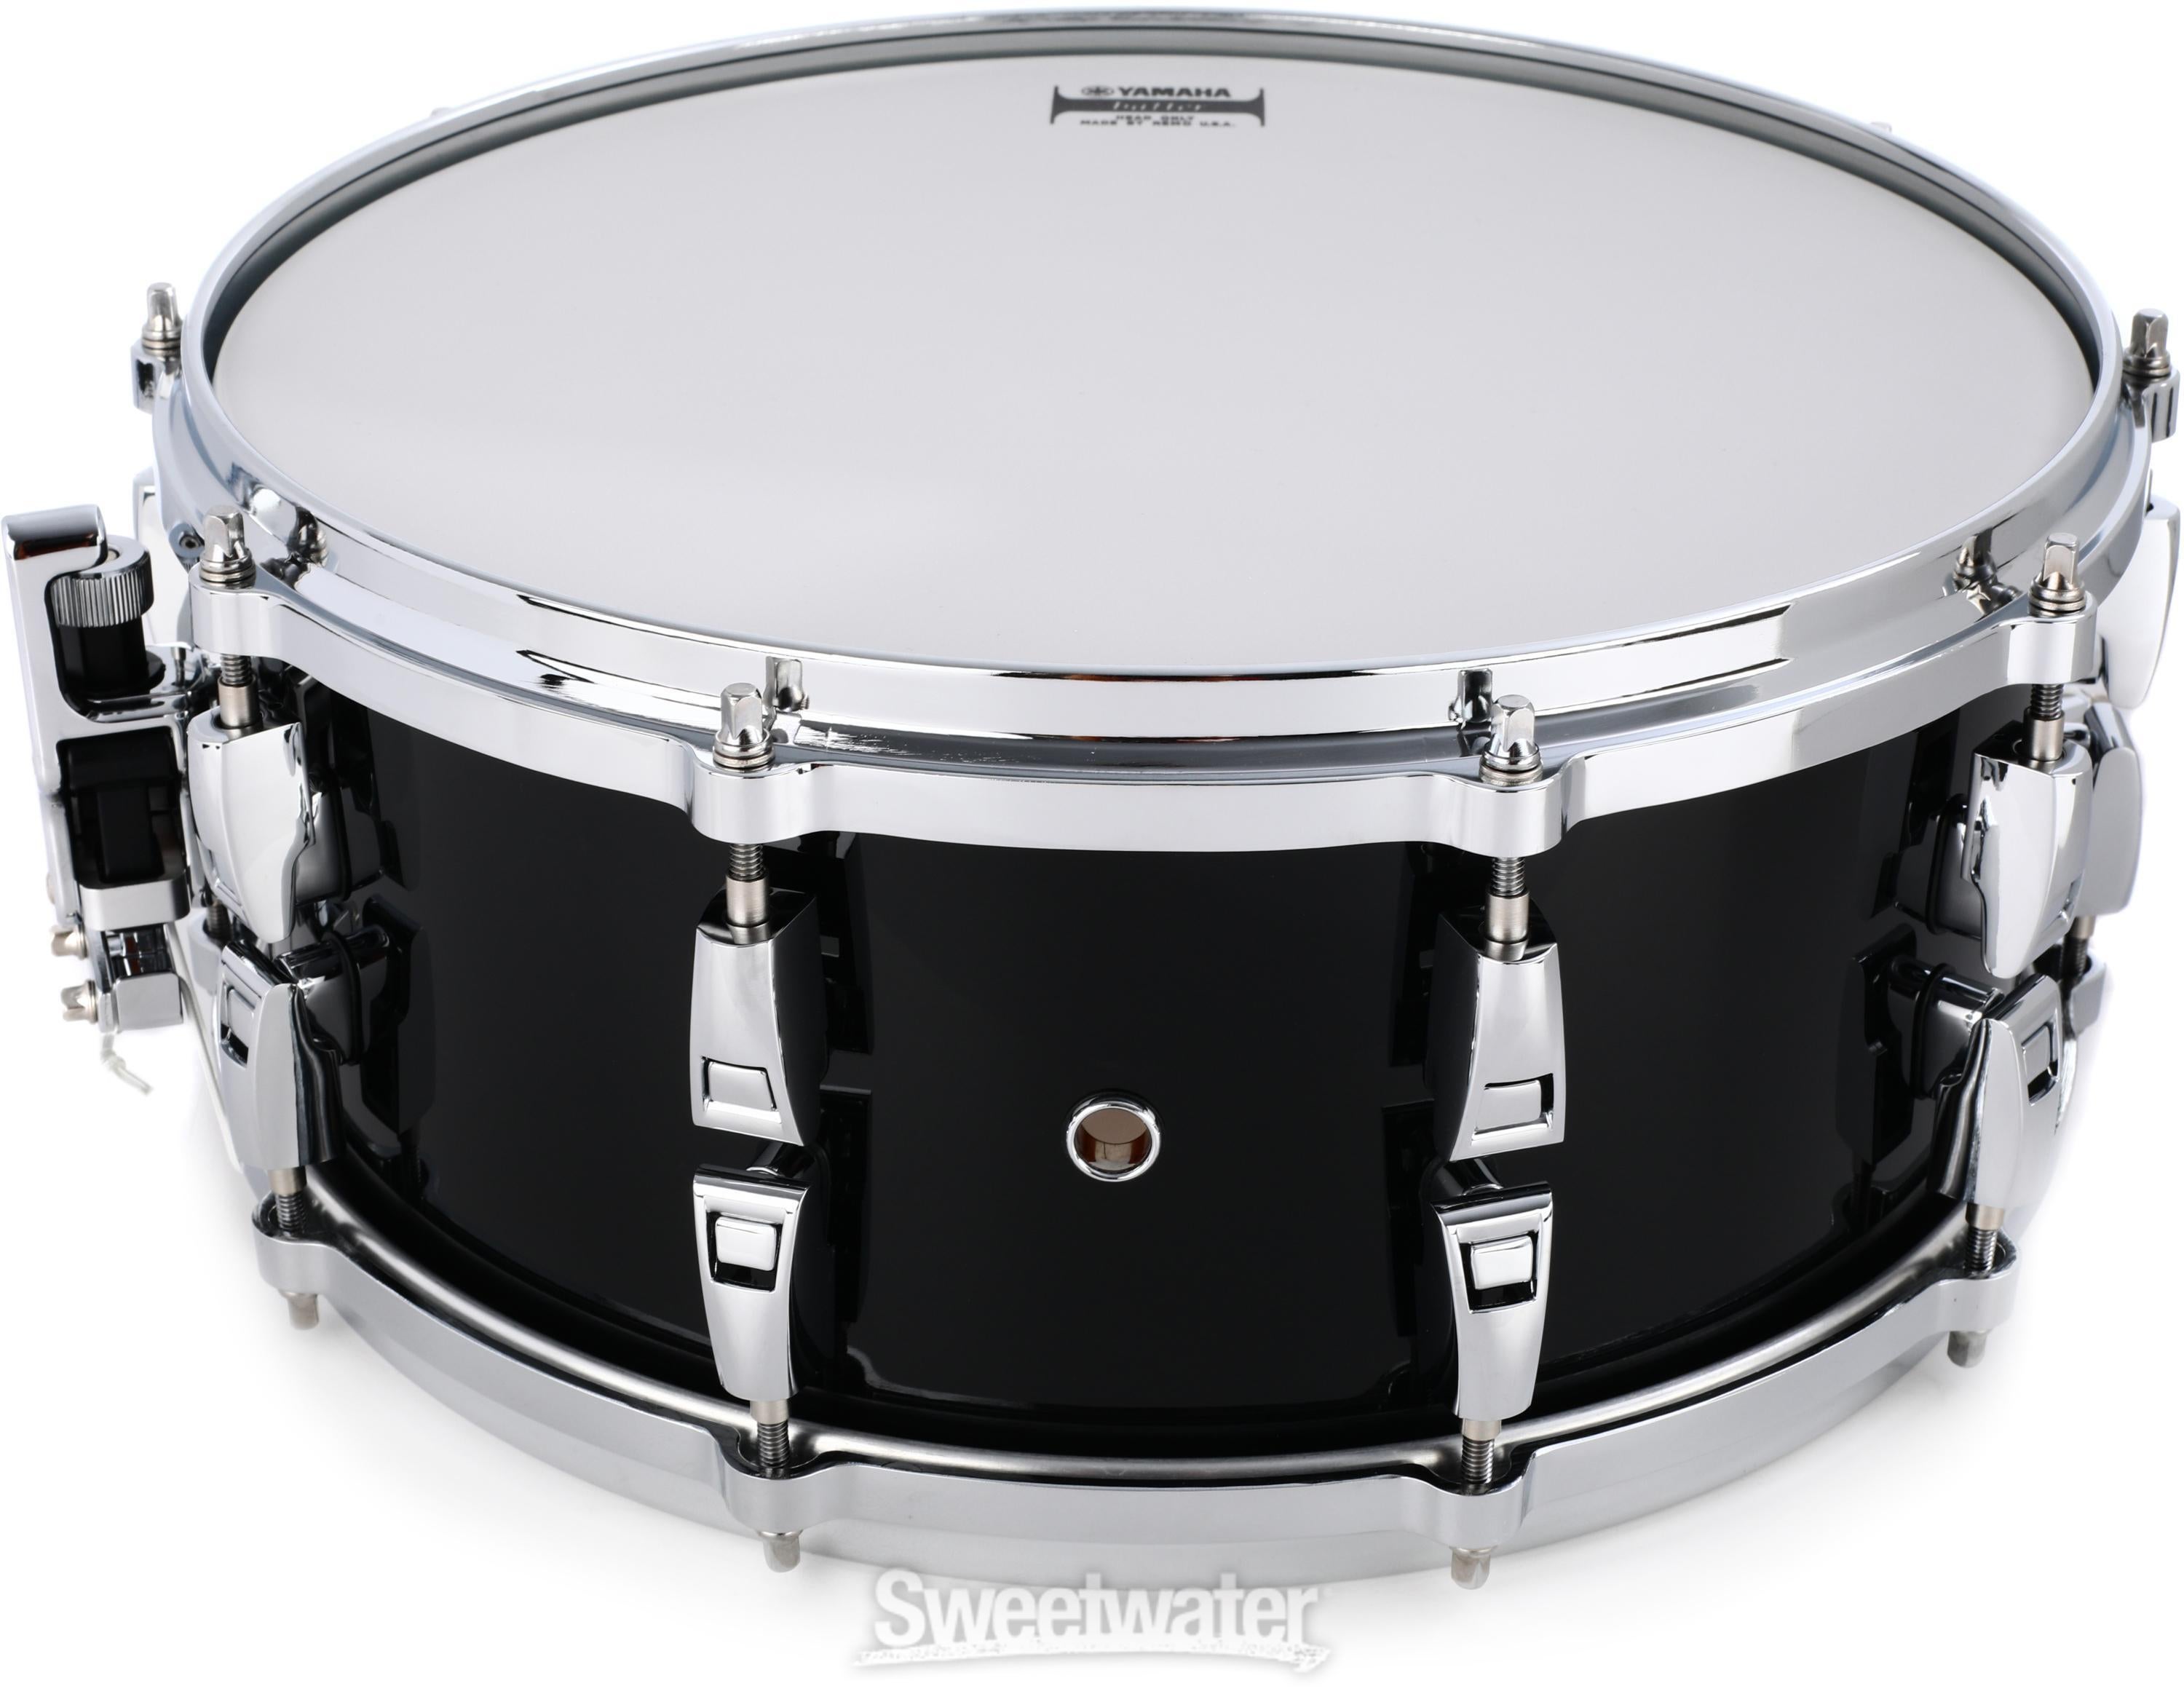 Yamaha AMS-1460 Absolute Hybrid Maple 6 x 14-inch Snare Drum